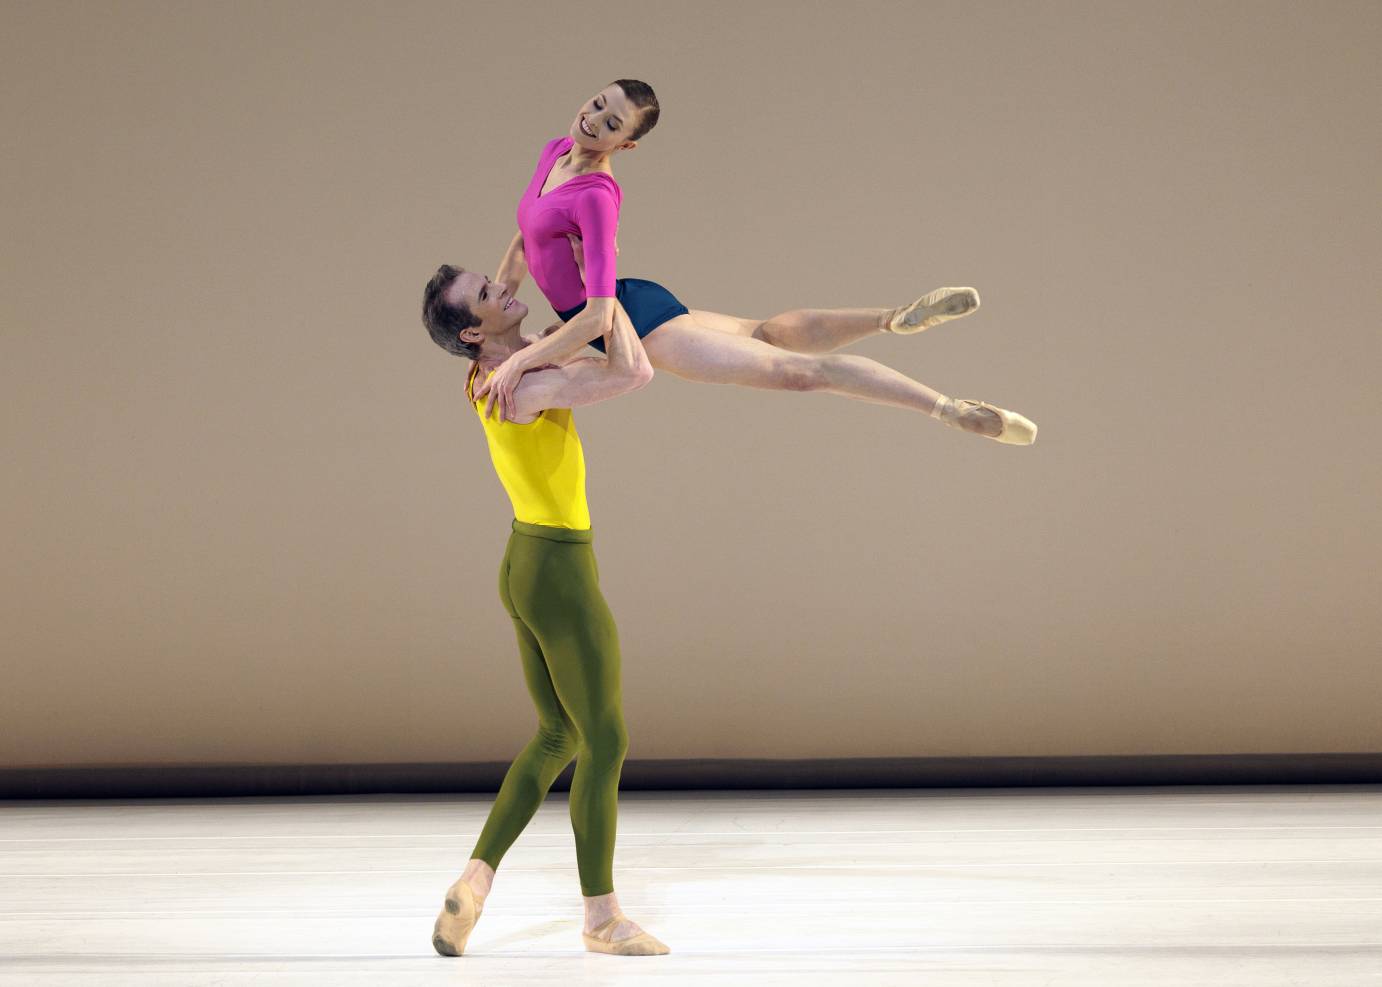 a beautifully happy positive duet... a man in a bright yellow top and olive green tights swings his female partner in the air. she has bare legs pointe shoes, a bright pink top and navy blue short shorts.. This seems to be a neo classical square dance 